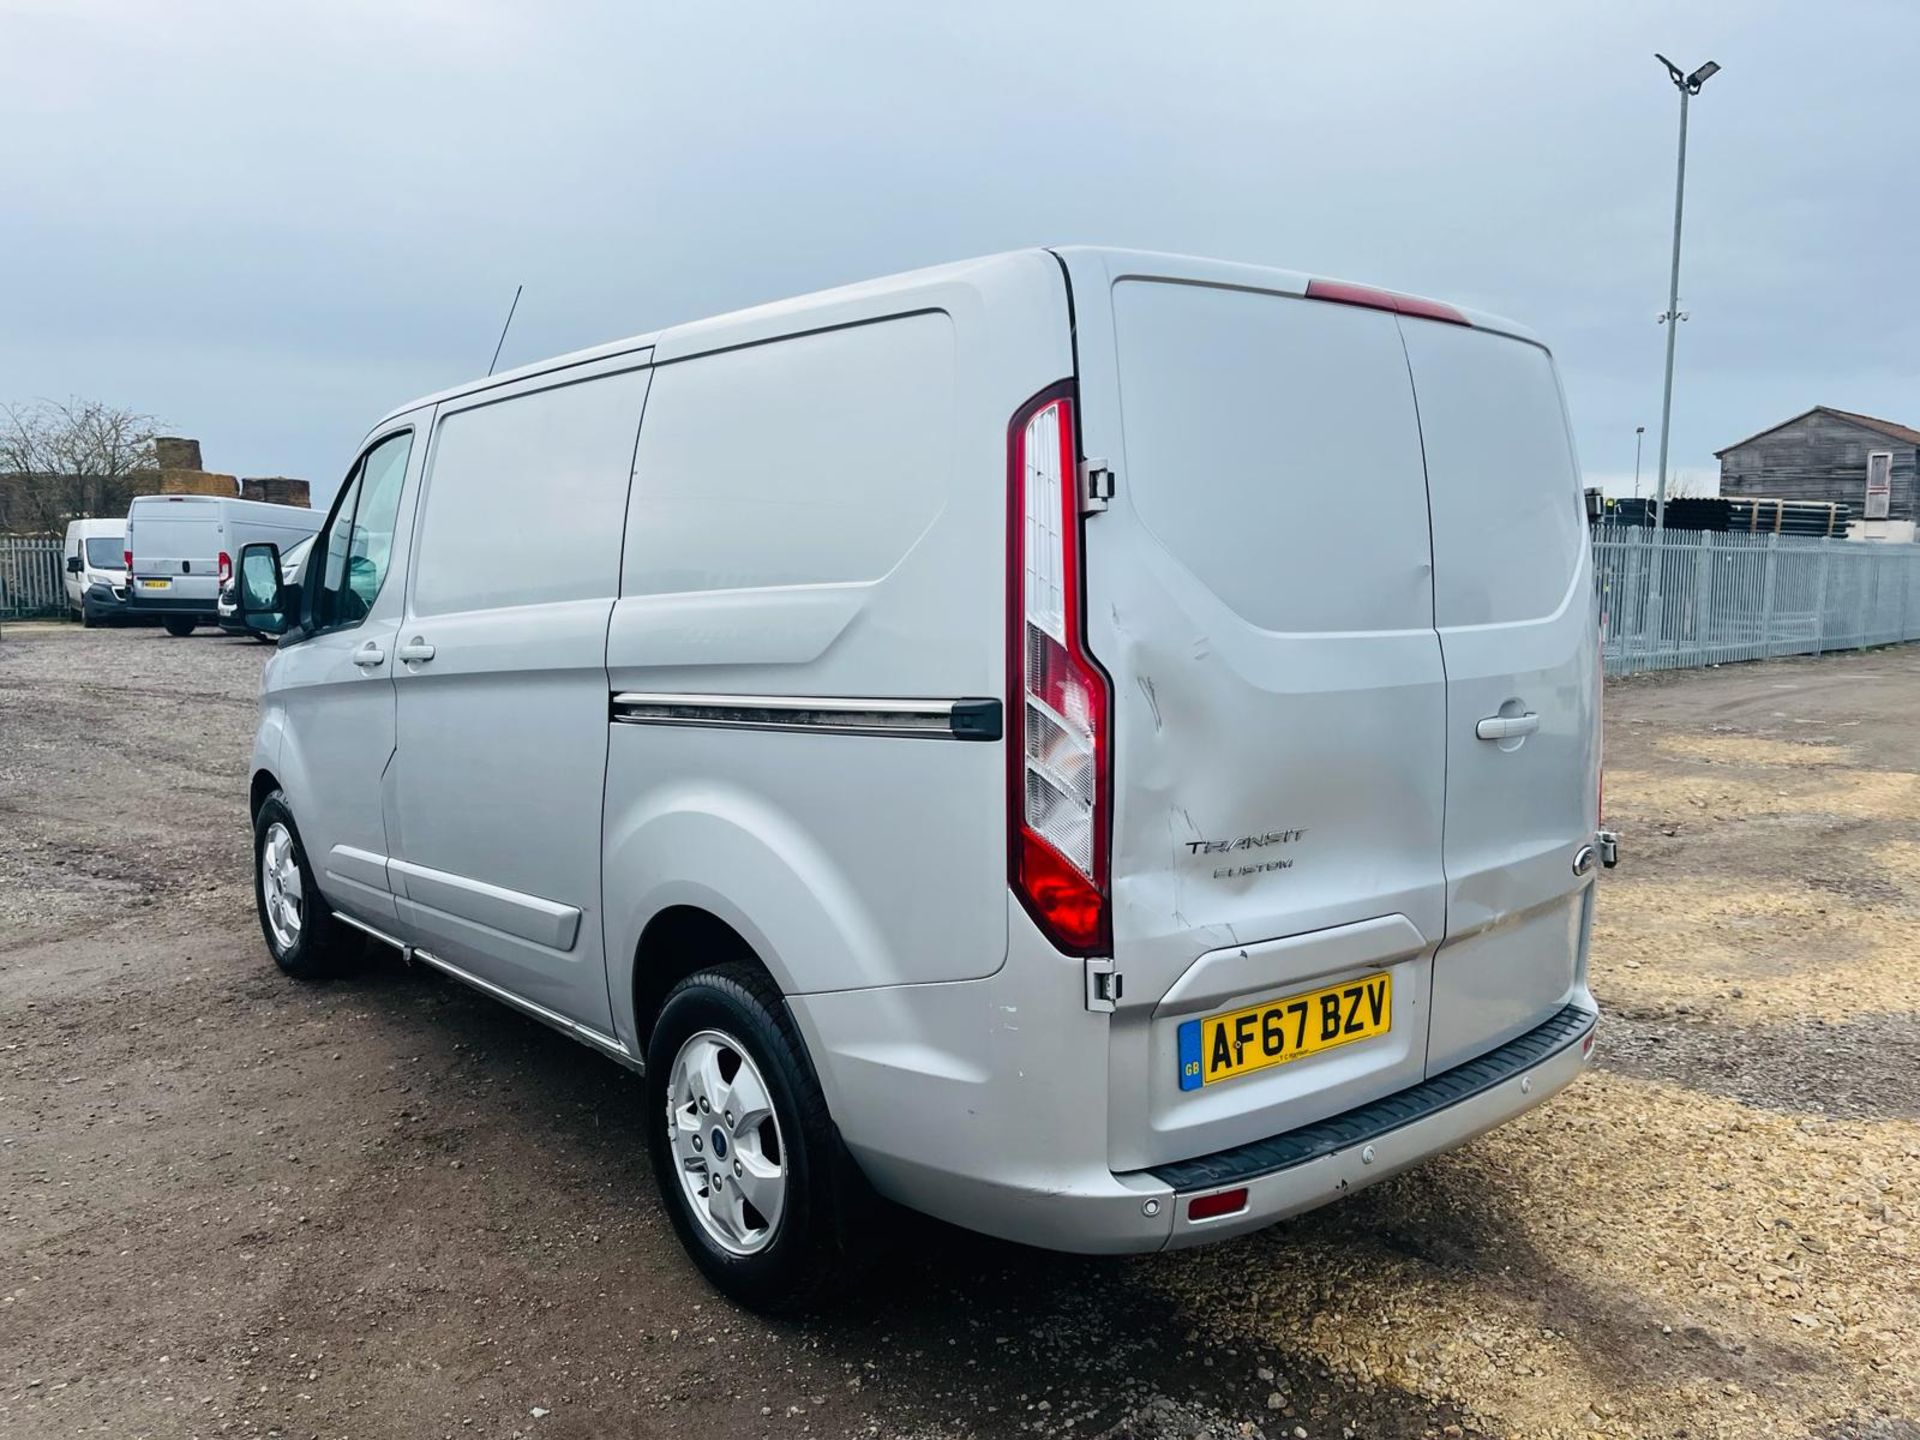 ** ON SALE ** Ford Transit Custom 130 2.0 Tdci Limited L1H1 PanelVan 2017'67 Reg'-1 Previous Owner - Image 8 of 27